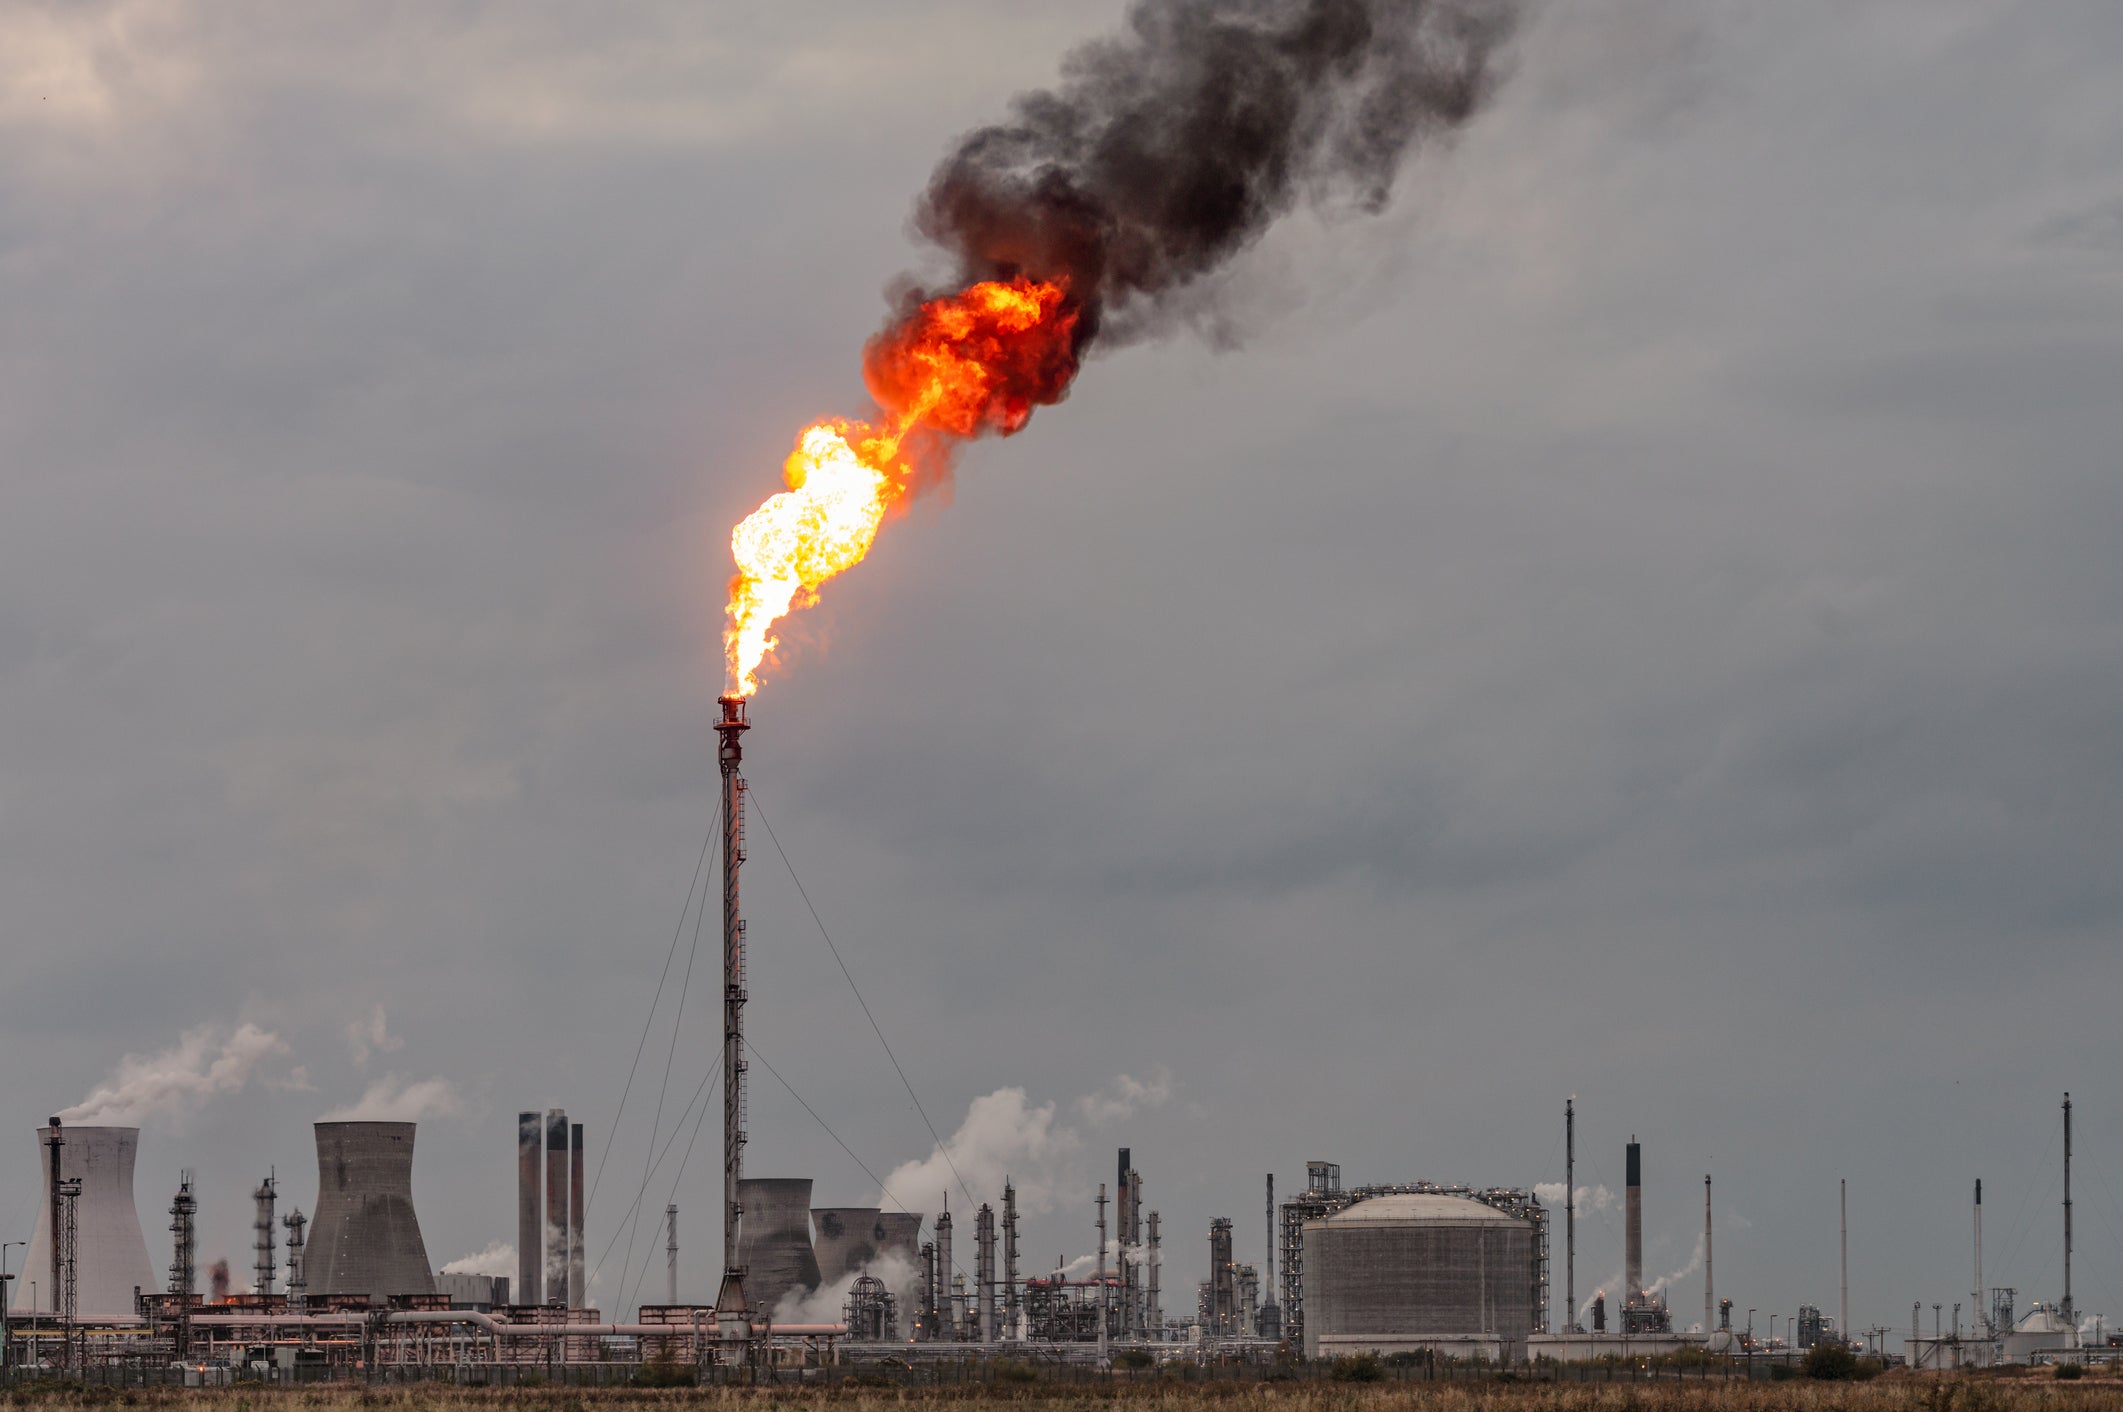 A large flame and dark smoke rising from a flare stack at Grangemouth oil refinery and petrochemical plant in Scotland